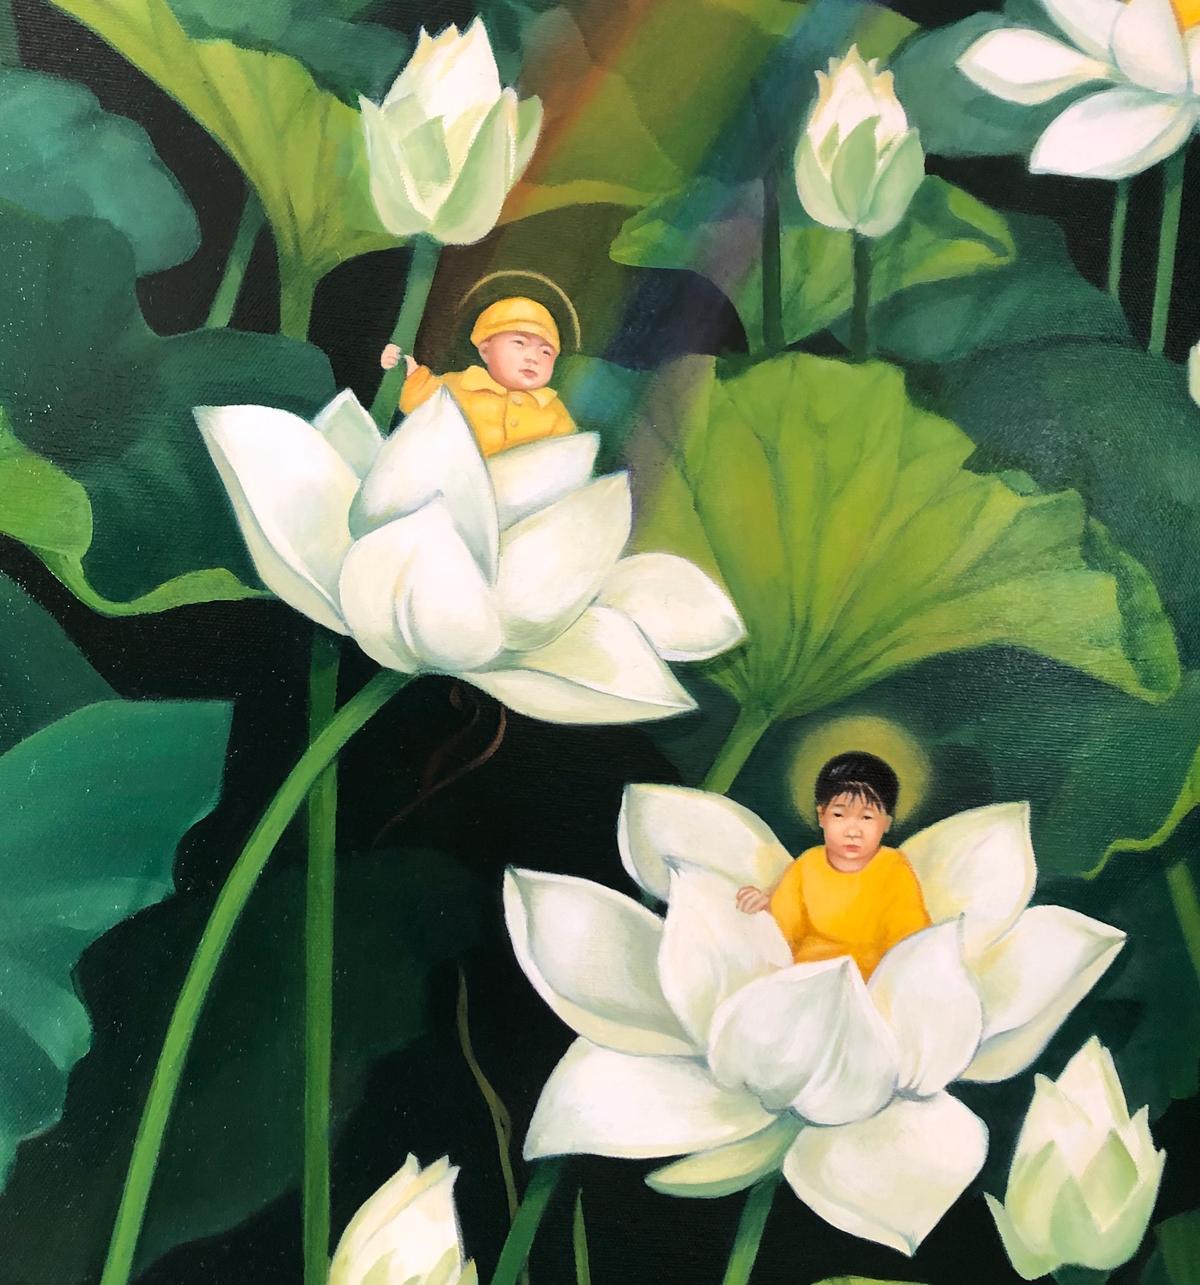 A detail of "The Sea of Suffering" oil painting: (L) An 8-month-old baby boy, Meng Hao, who was persecuted to death along with his mother; (R) A girl, Huang Ying, who lost her mother to the persecution. (Courtesy of Barbara Schafer)